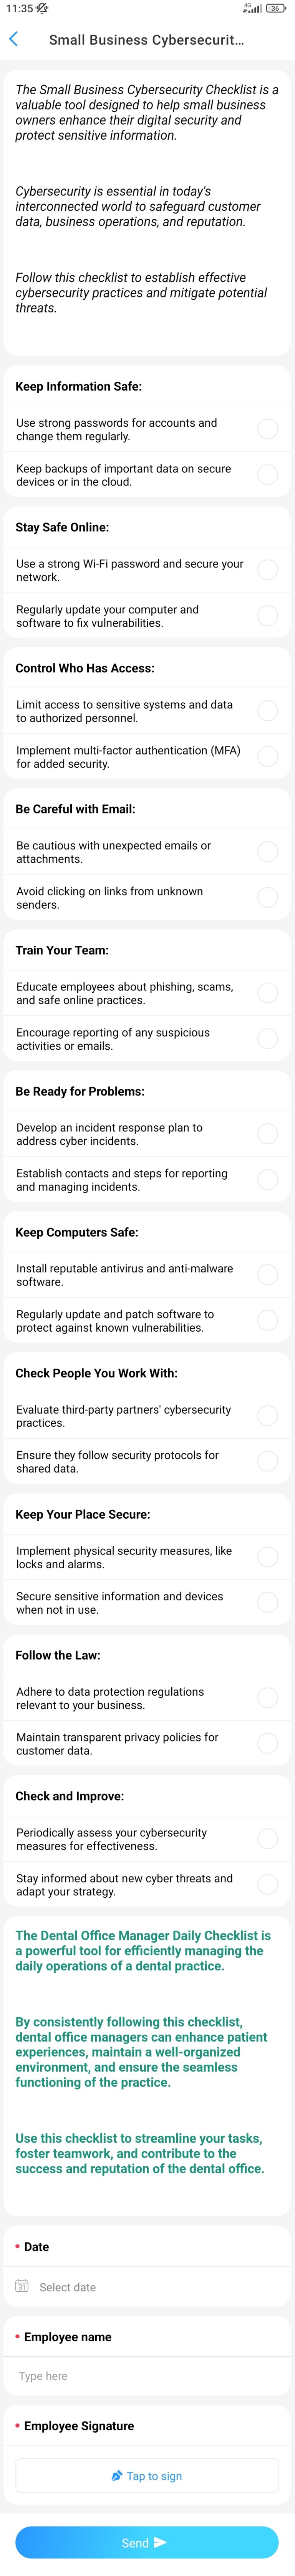 Small Business Cybersecurity Checklist